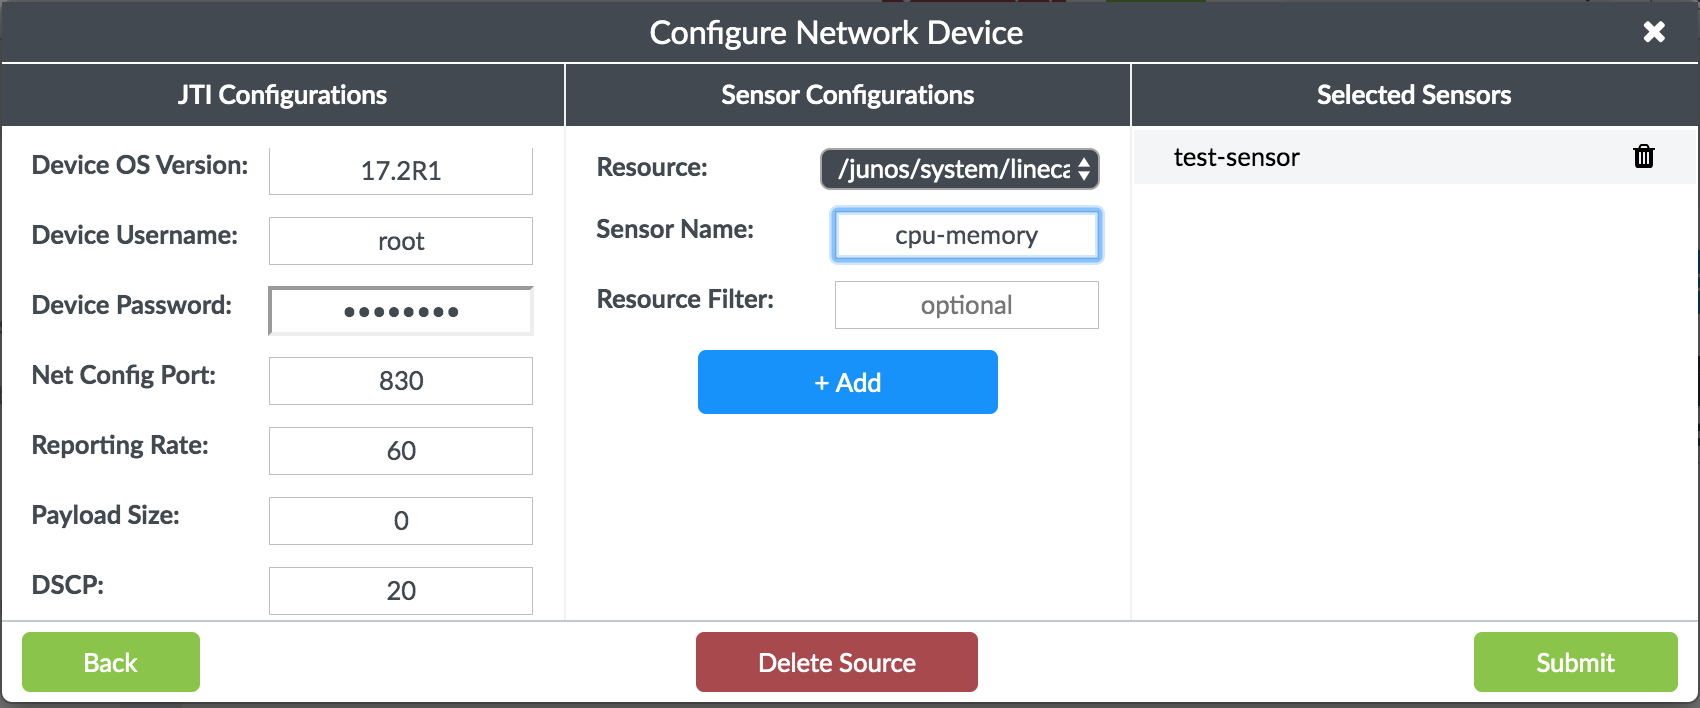 JTI Configuration Parameters in Configure Network Device Page